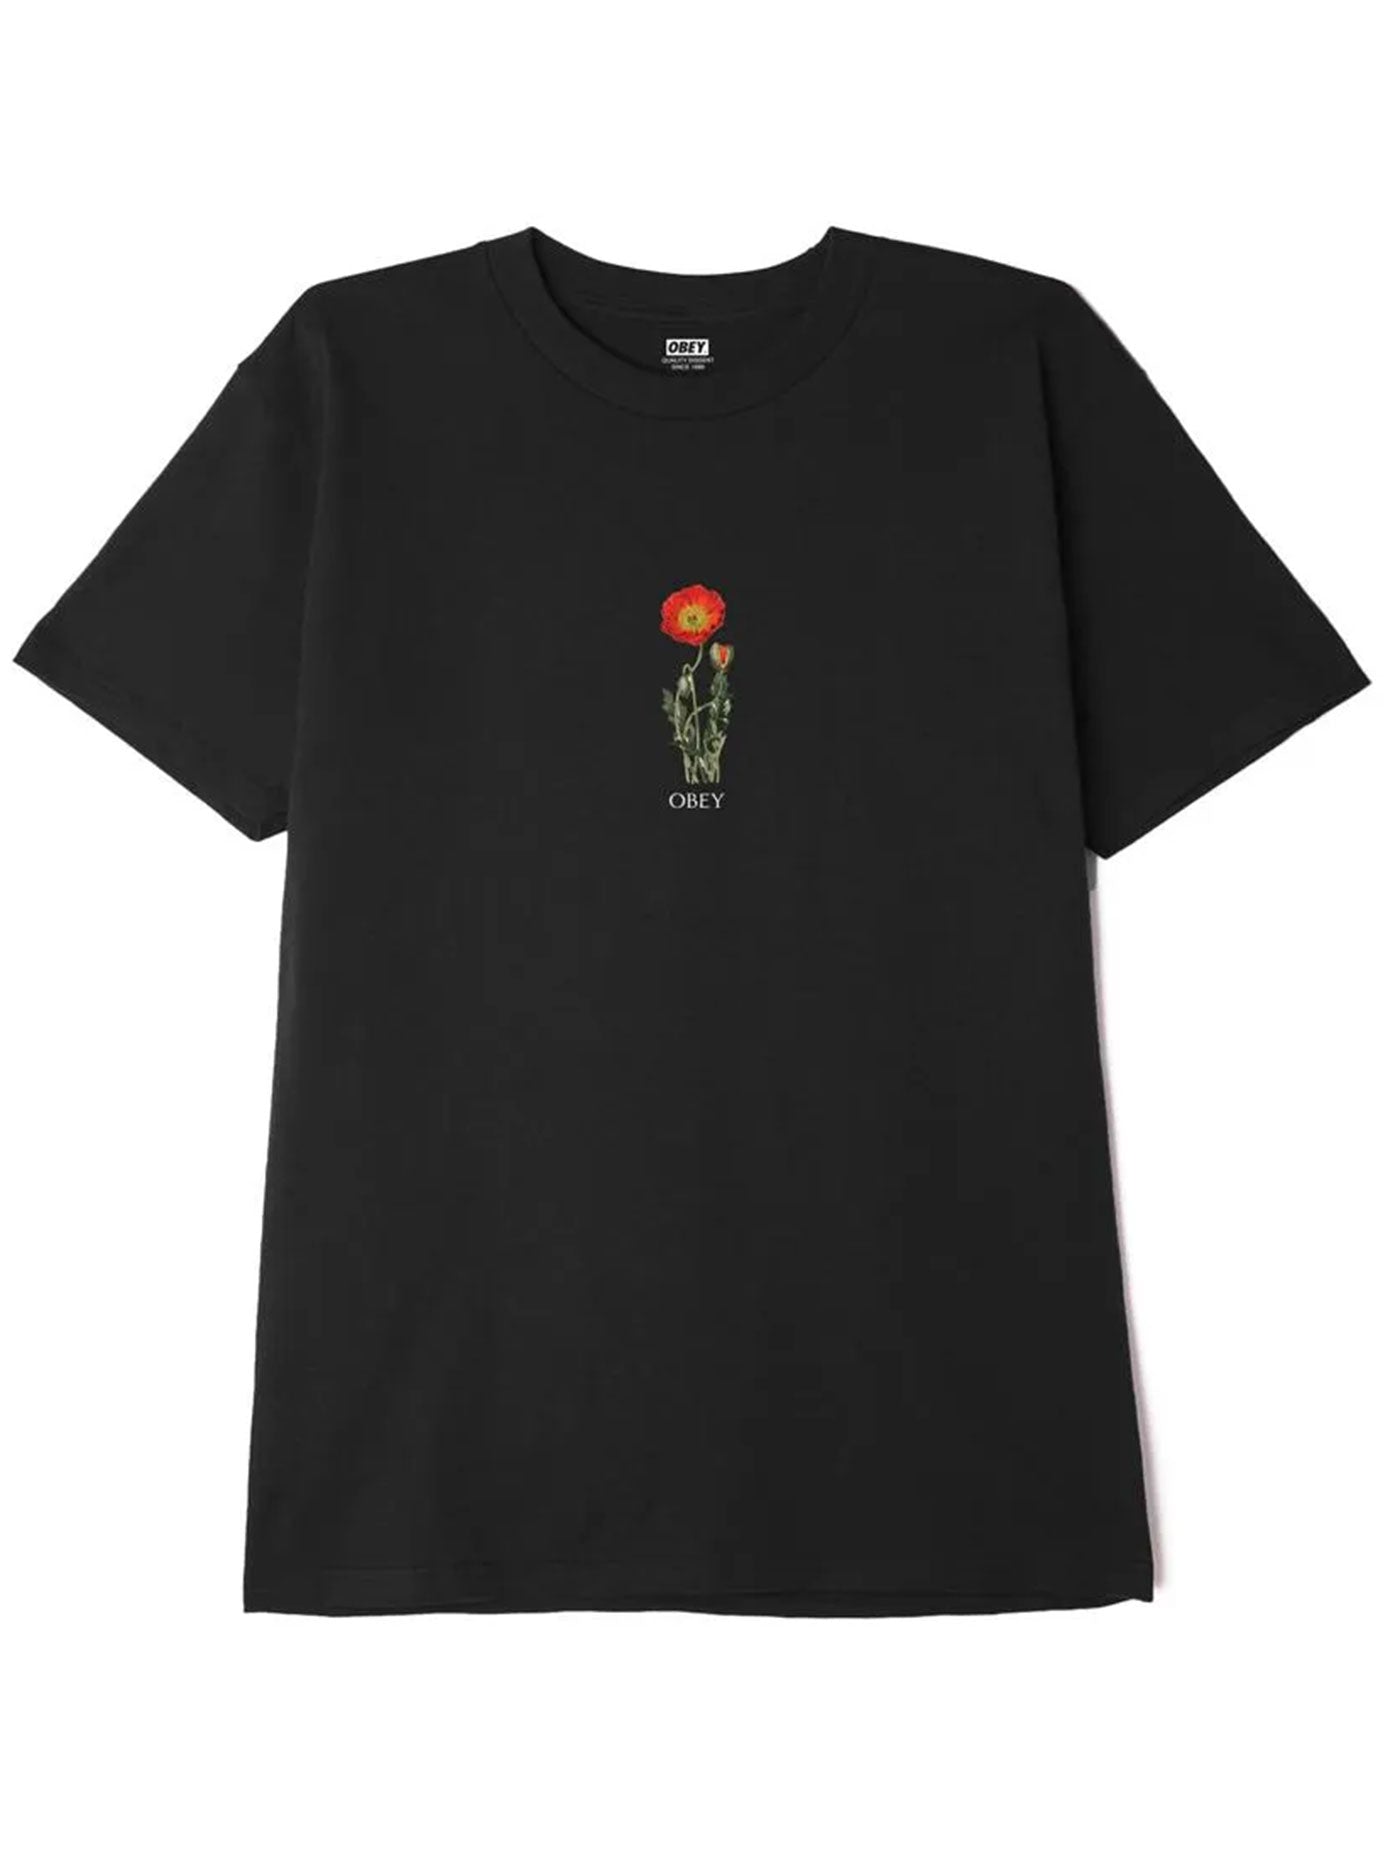 Obey T-shirt Chaos Flower